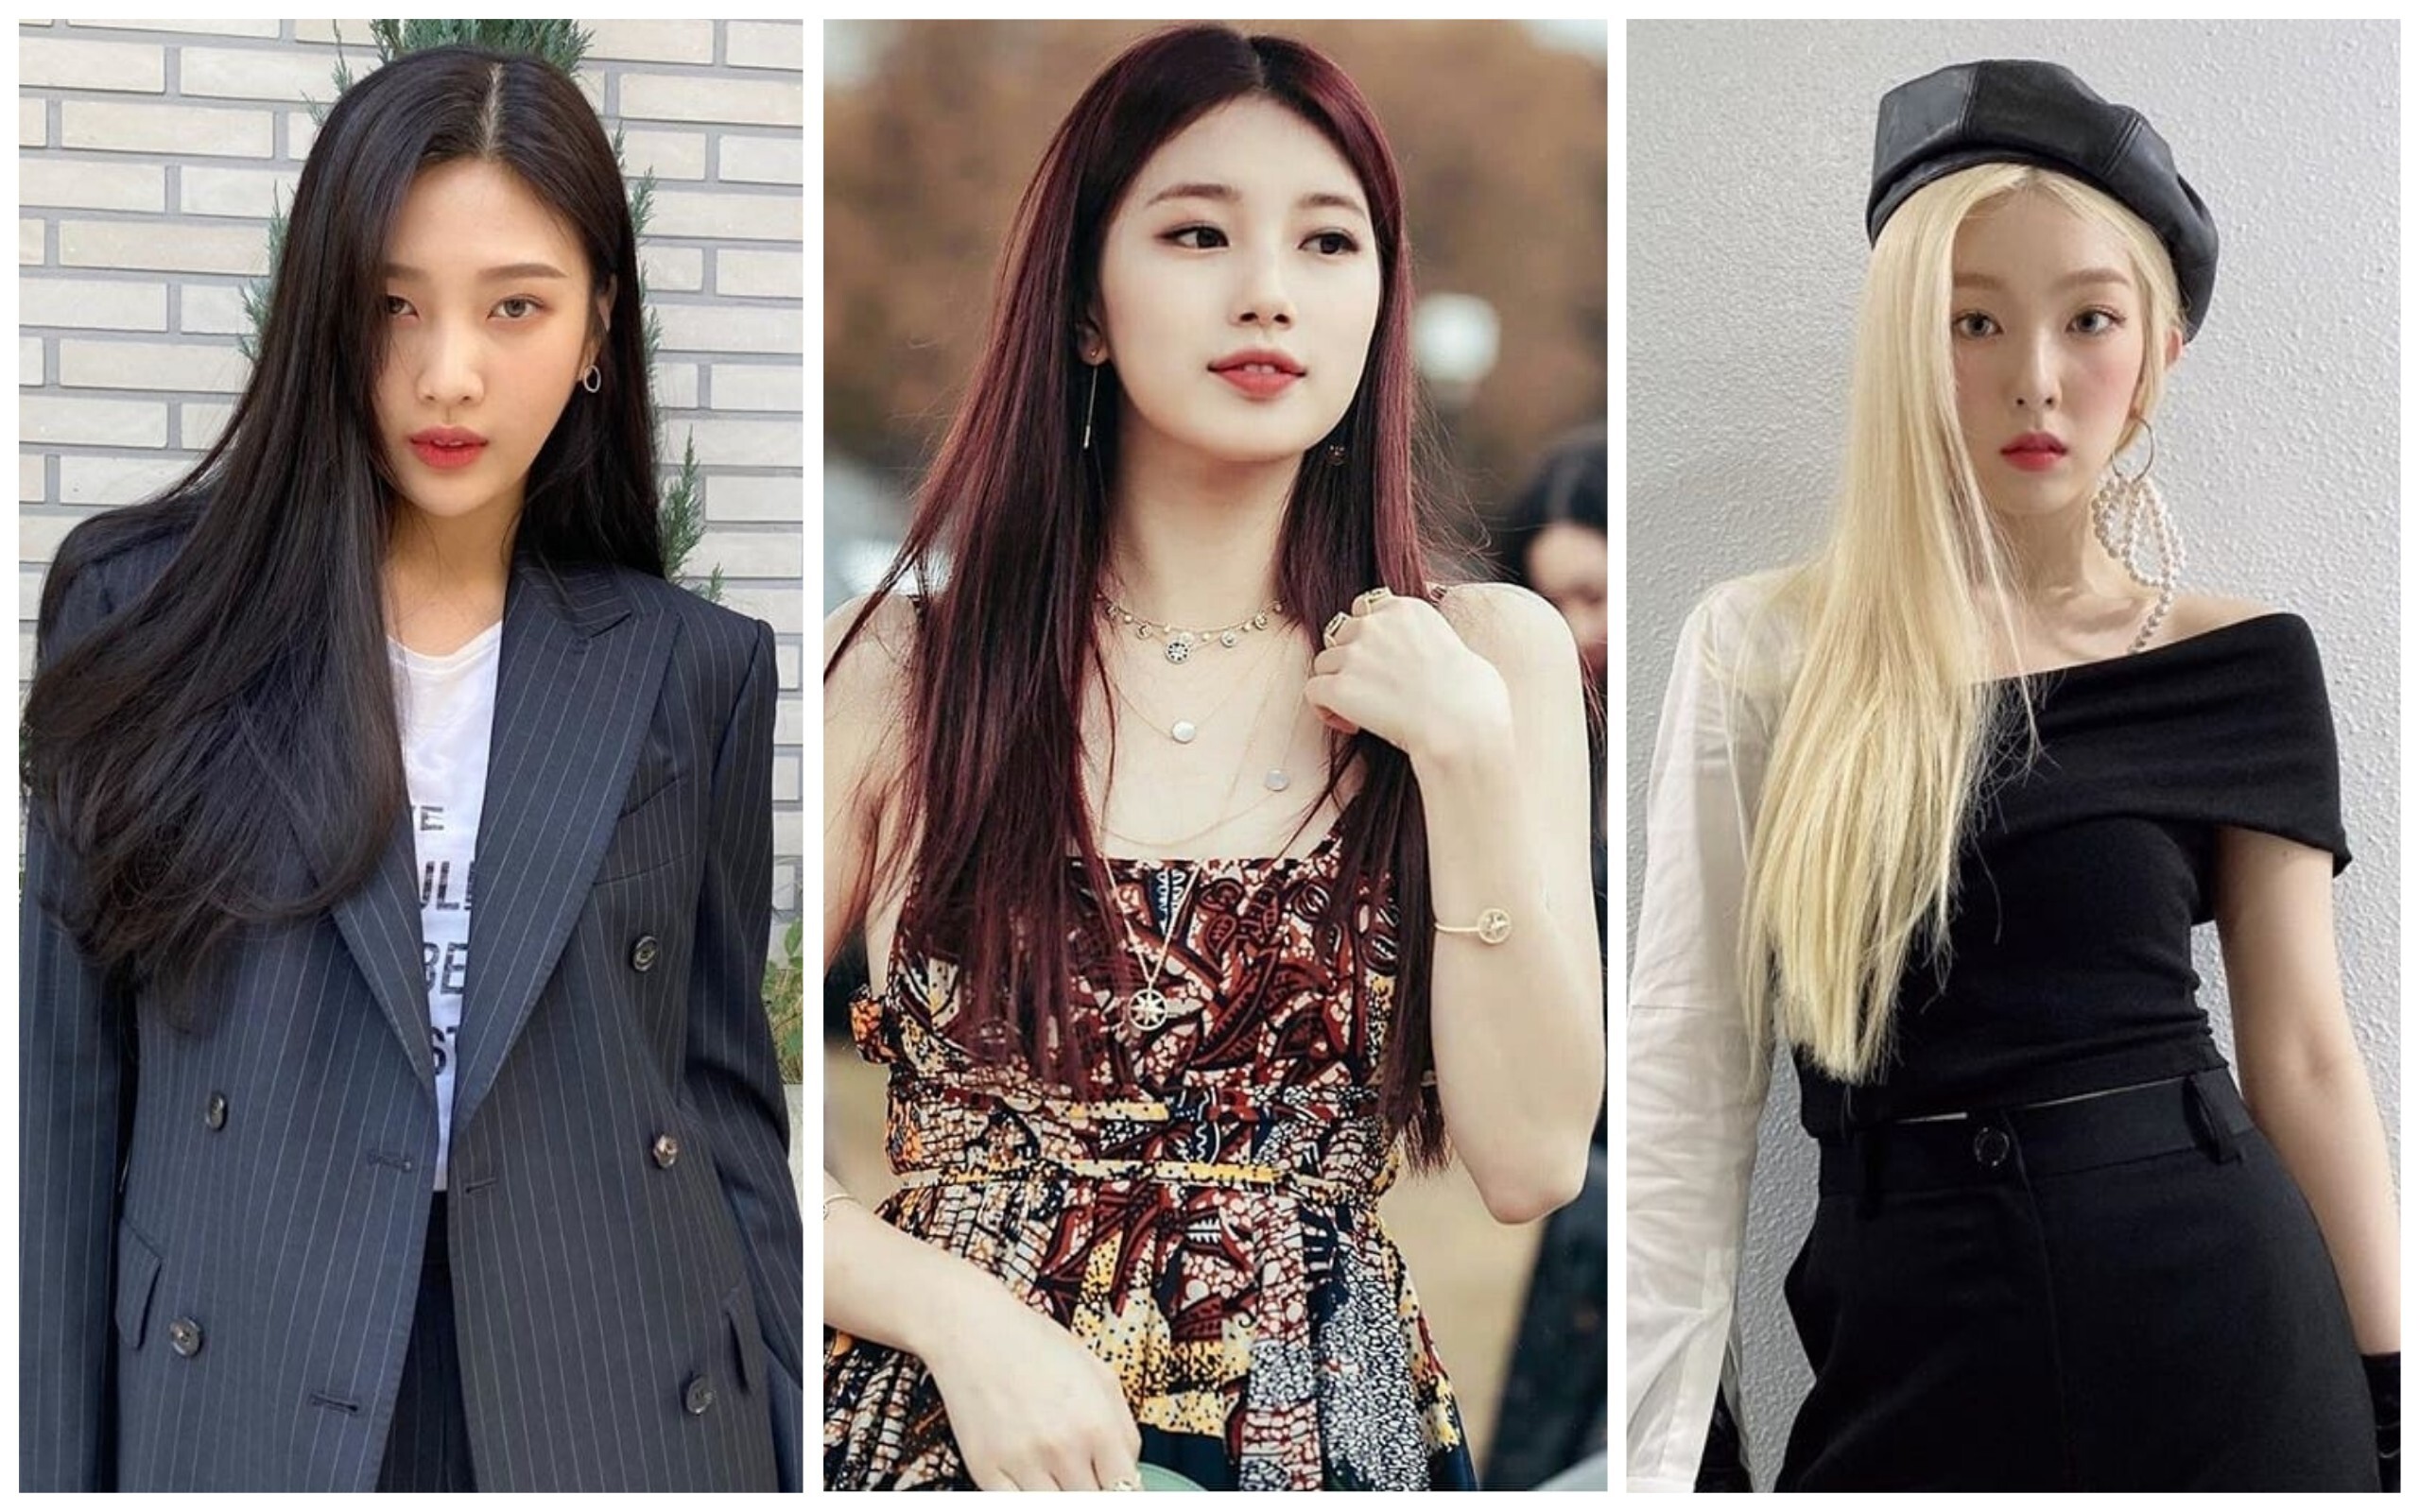 Red Velvet’s Joy, Bae Suzy and Red Velvet’s Irene have been unapologetic about their feminism, but still get criticised heavily for it. Photo: @_imyour_joy @suzy_fangirl94 @renebaebae/Instagram